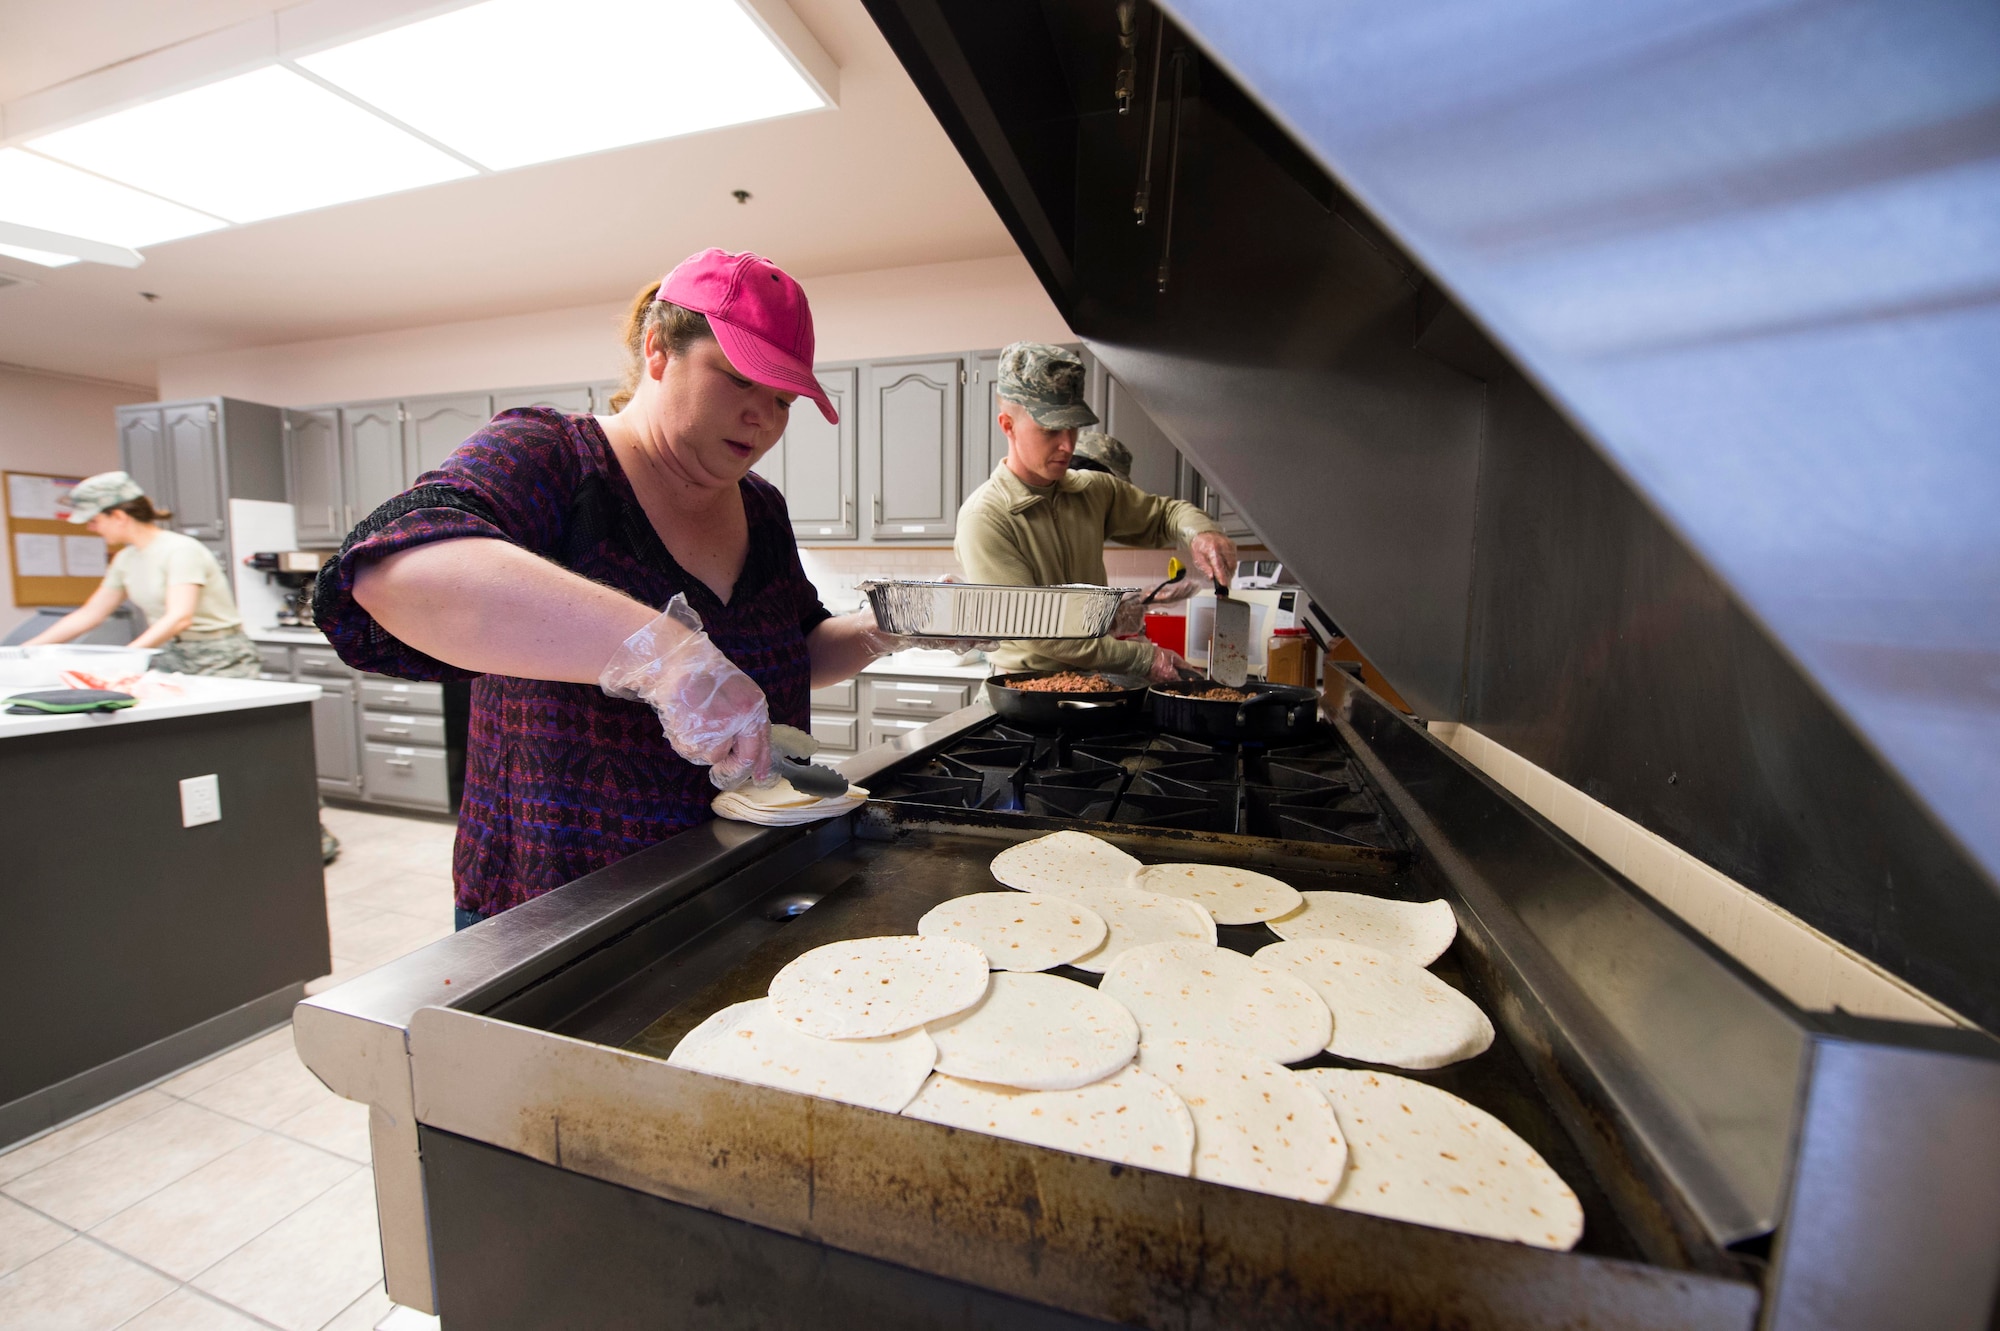 Rhonda Coburn, fellowship luncheon volunteer, prepares tortillas on a stove in the Chapel Activity Center at F.E. Warren Air Force Base, Wyo., Feb. 2, 2017. The 90th Missile Wing Chaplain Corps hosts a monthly fellowship luncheon for all base personnel. (U.S. Air Force photo by Staff Sgt. Christopher Ruano)